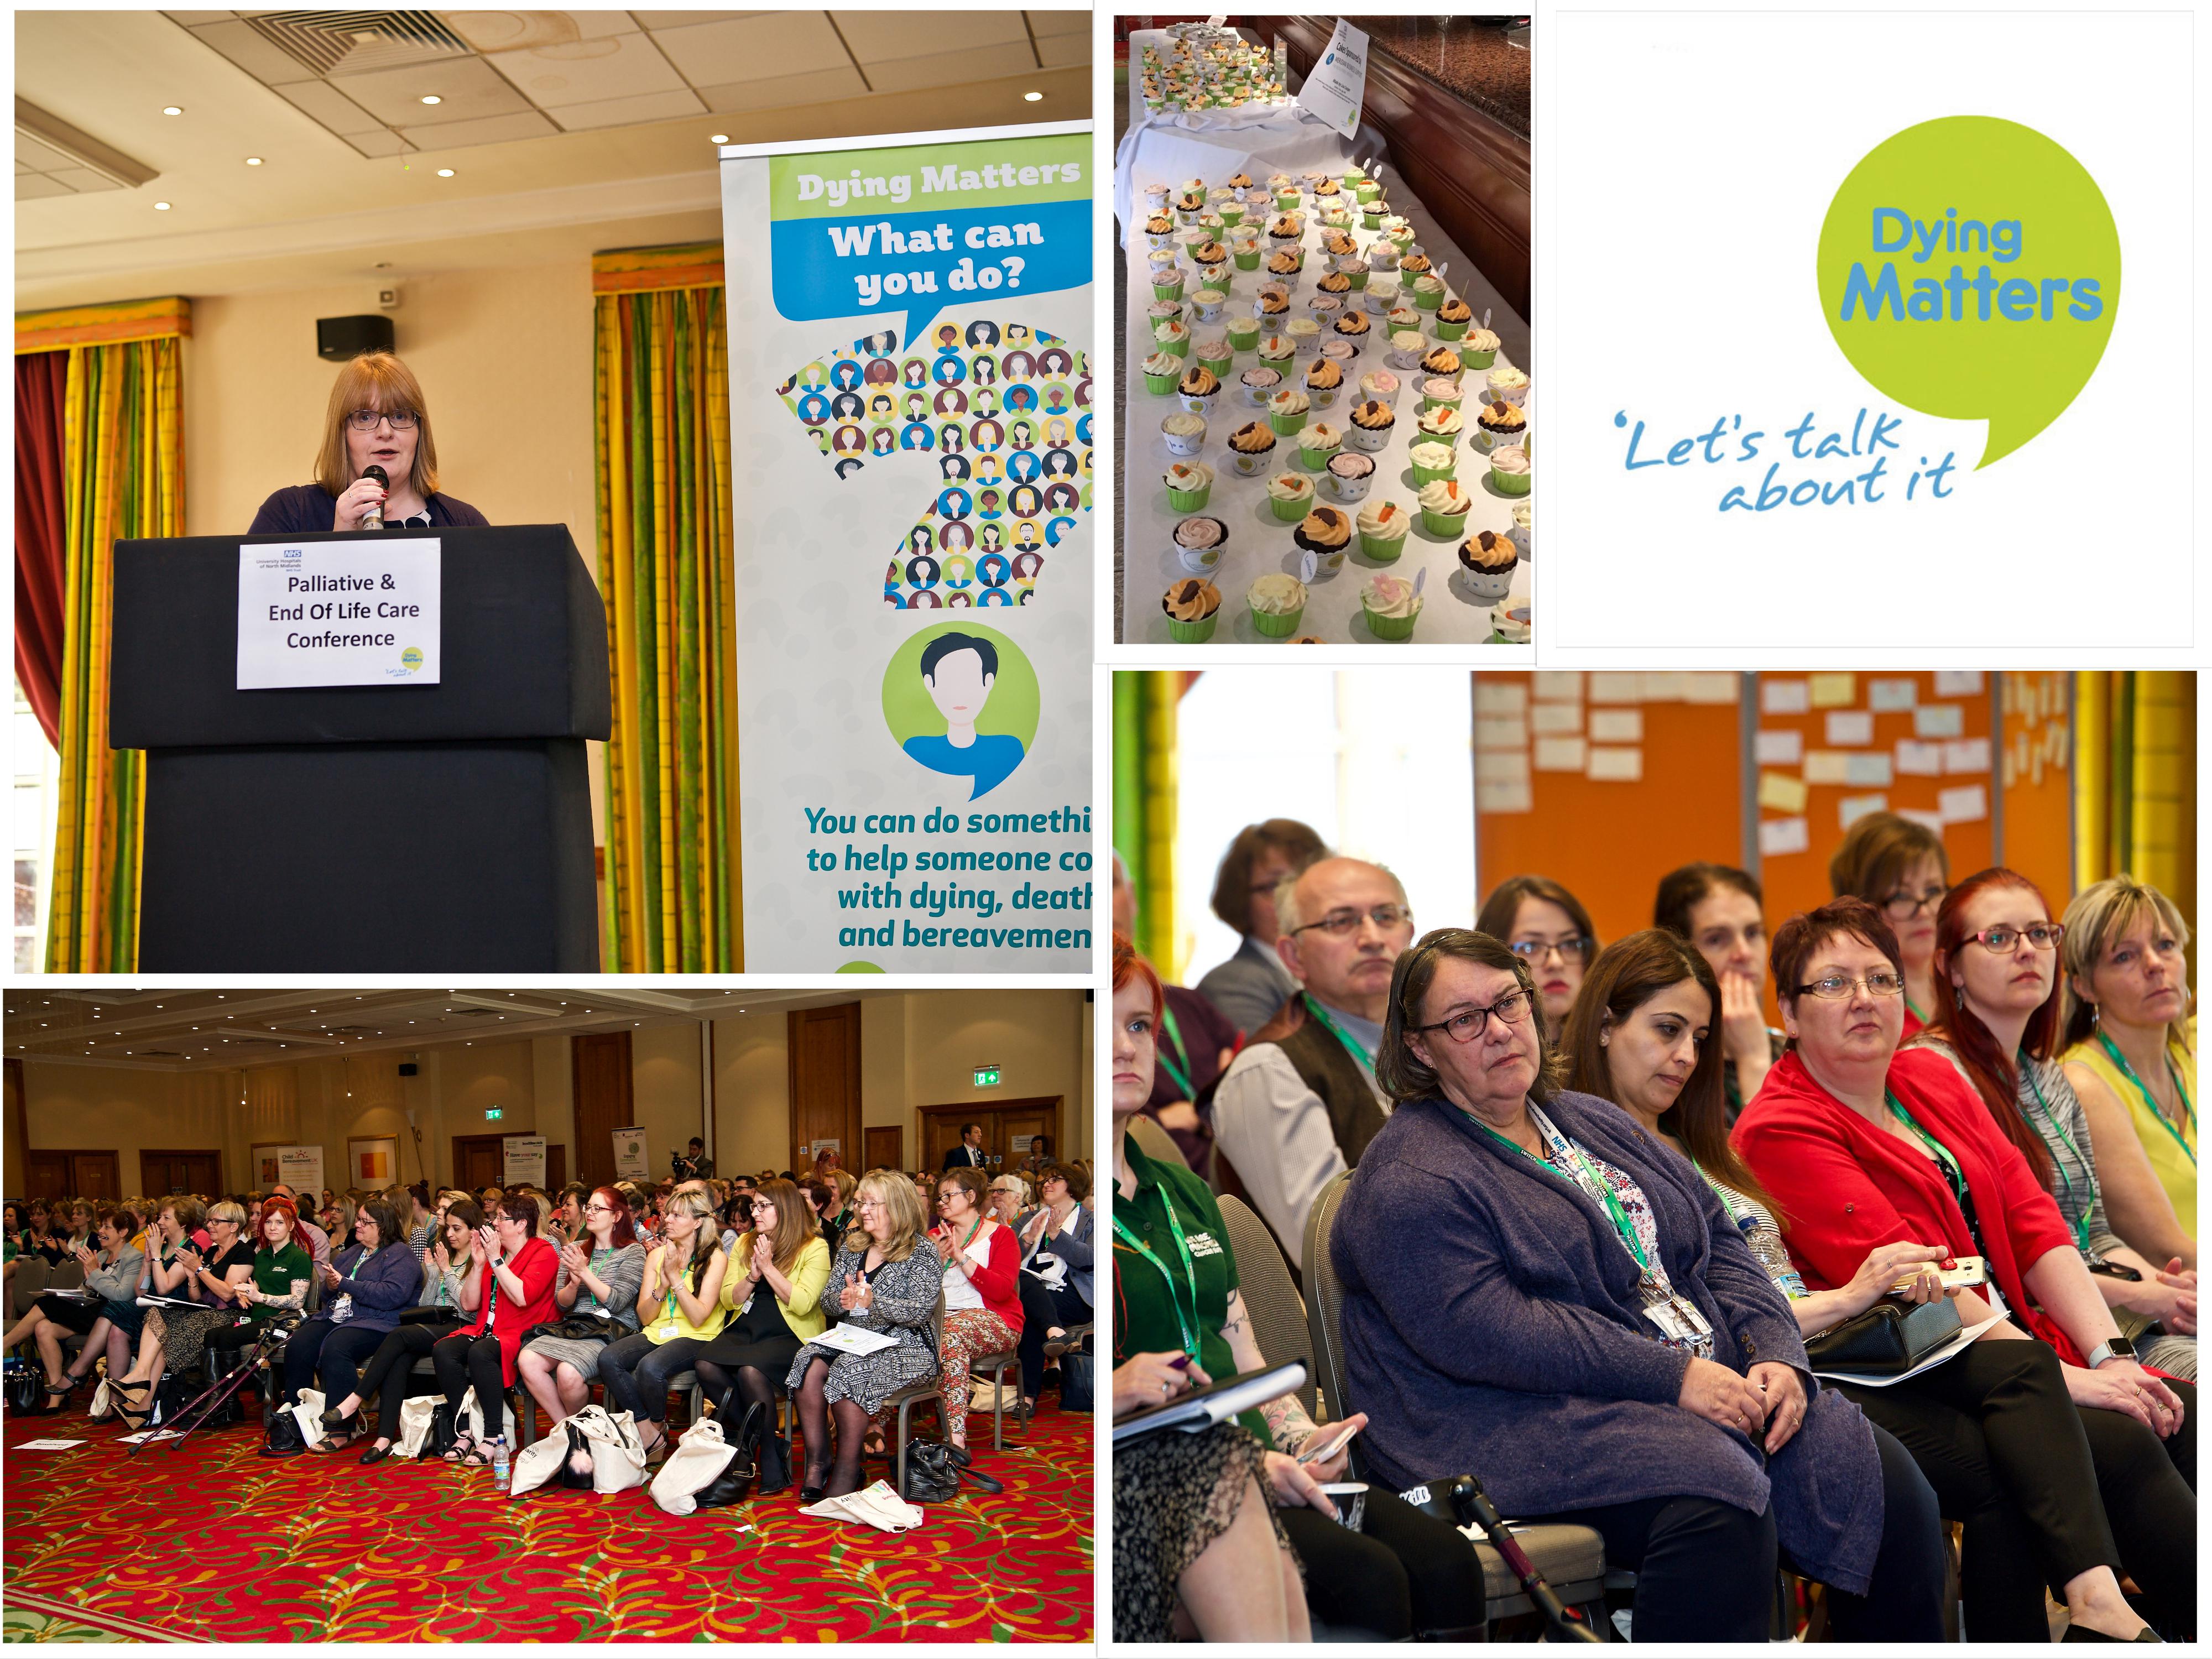 Palliative & End of Life Care Conference - Do it your way! featured image